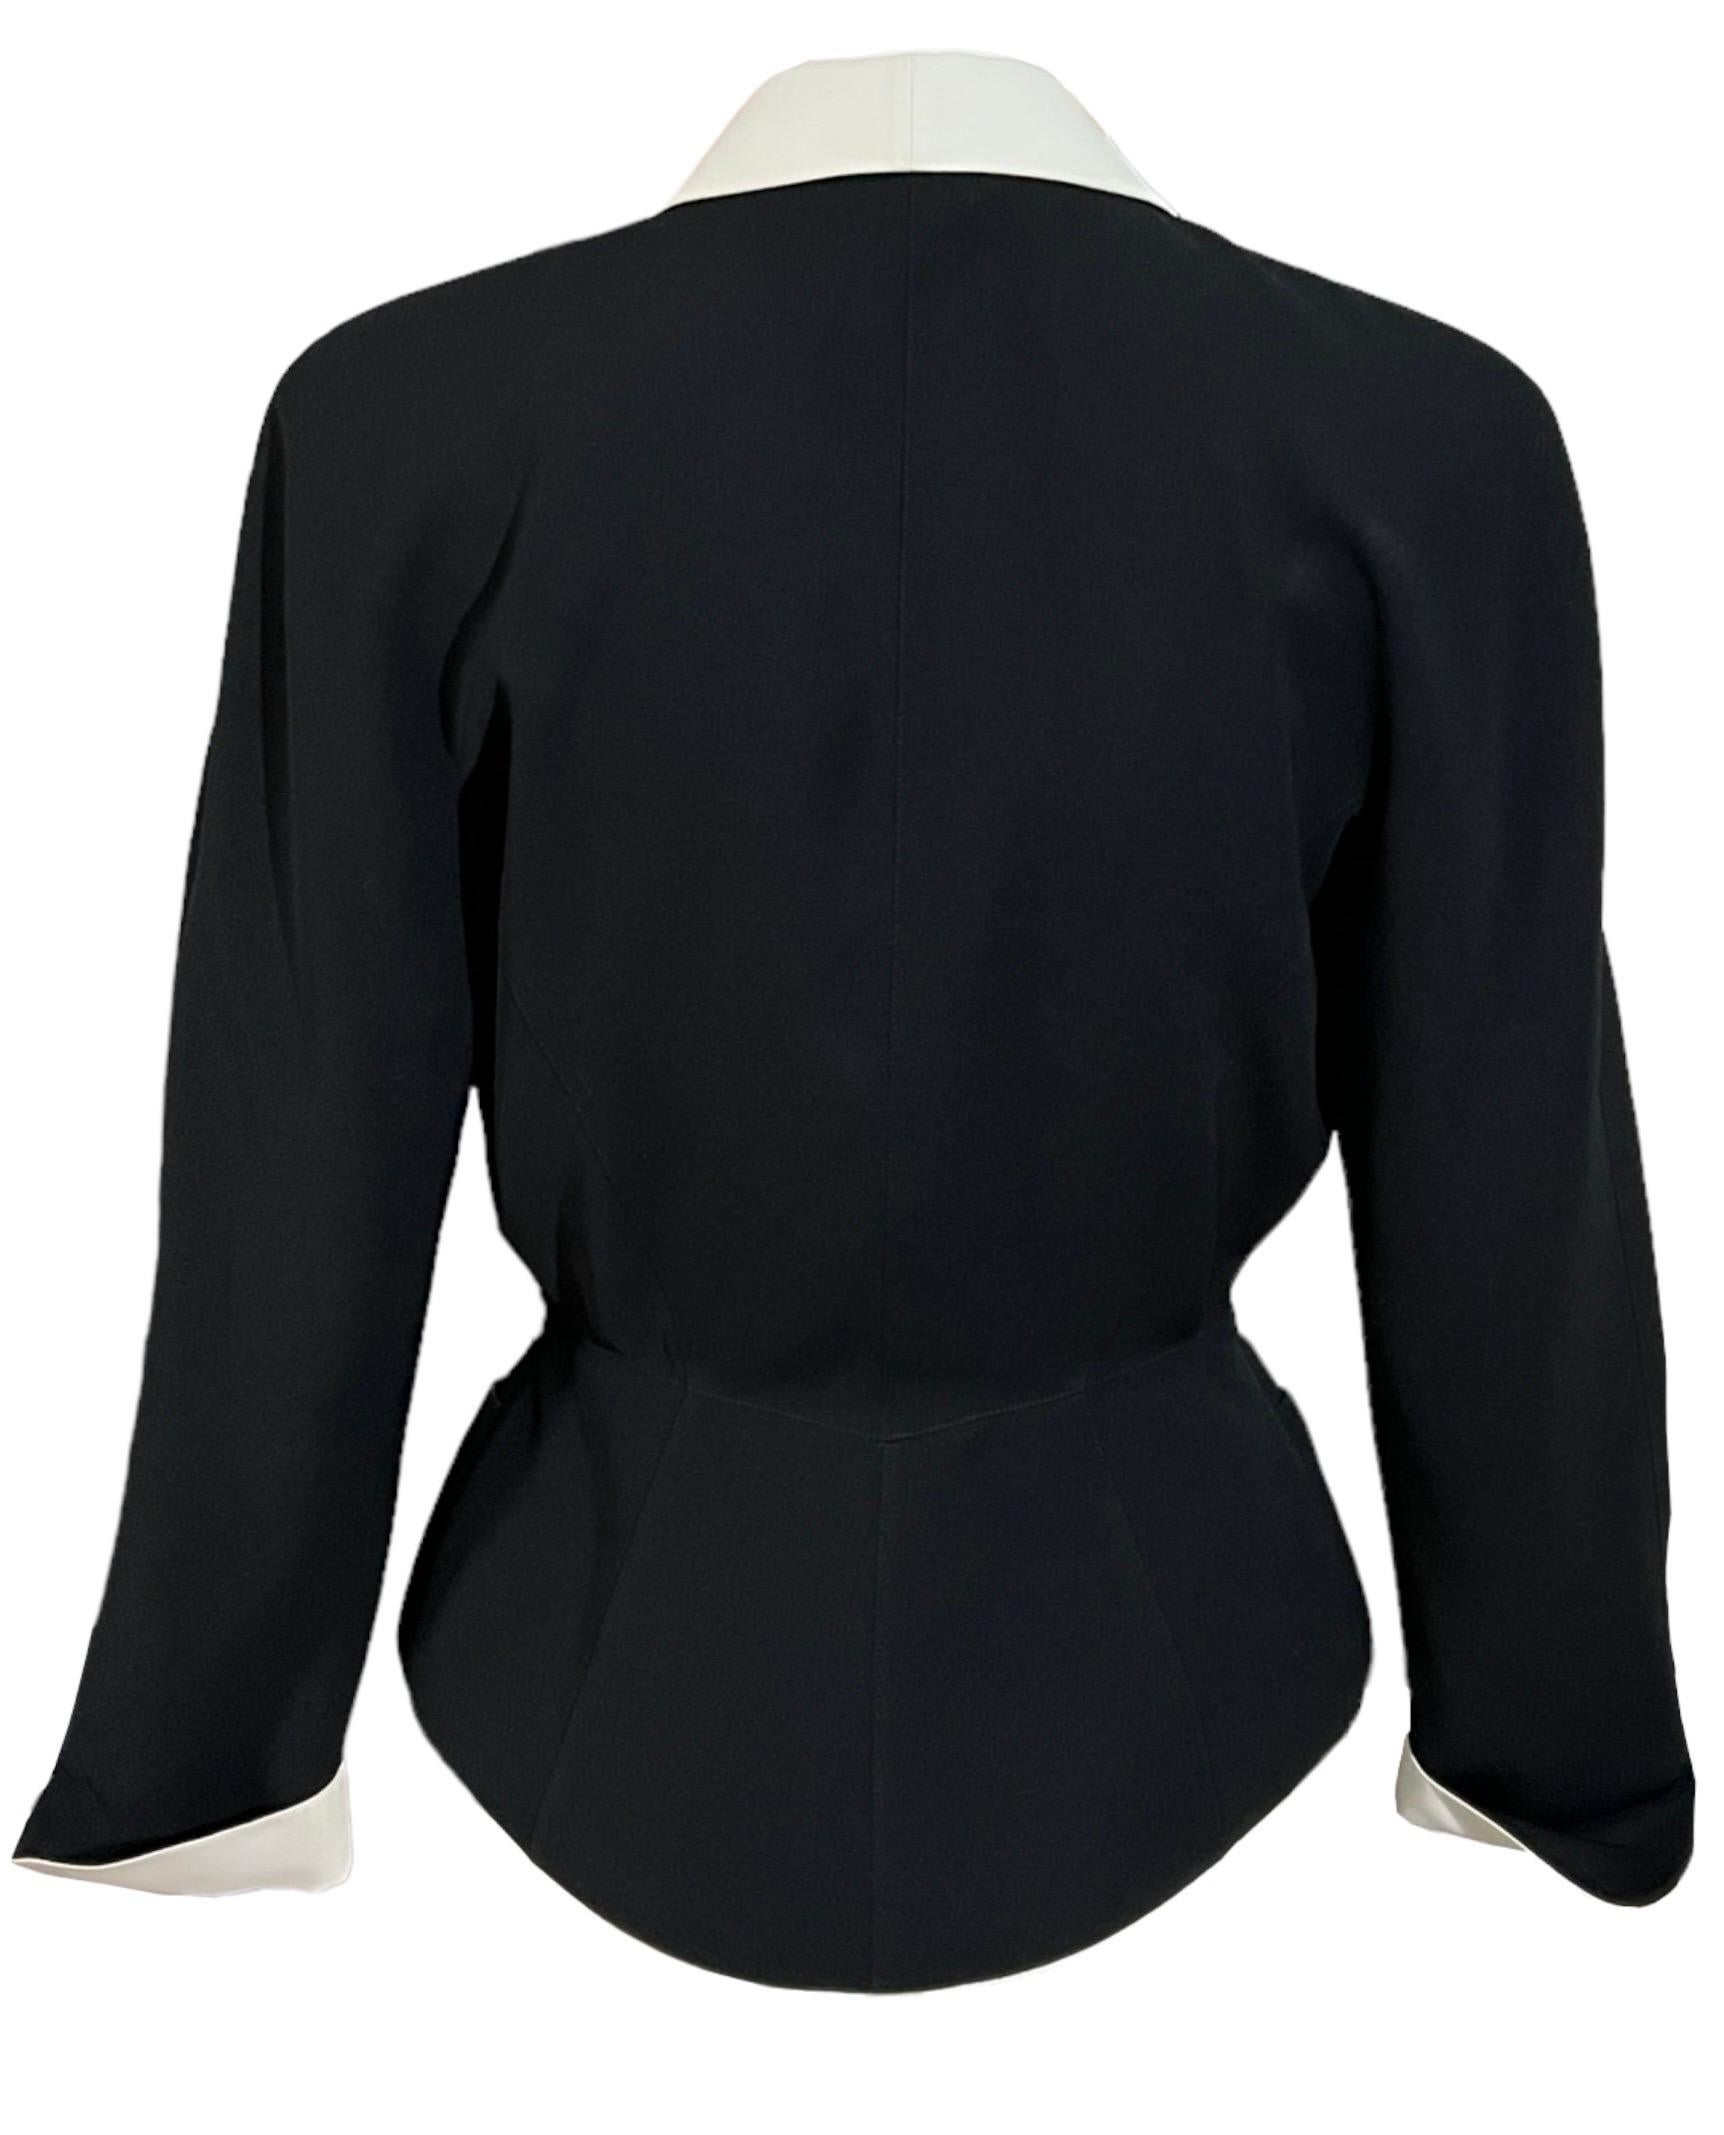 S/S 1992 Thierry Mugler Black Runway Jacket Dramatic White Collar For Sale 1